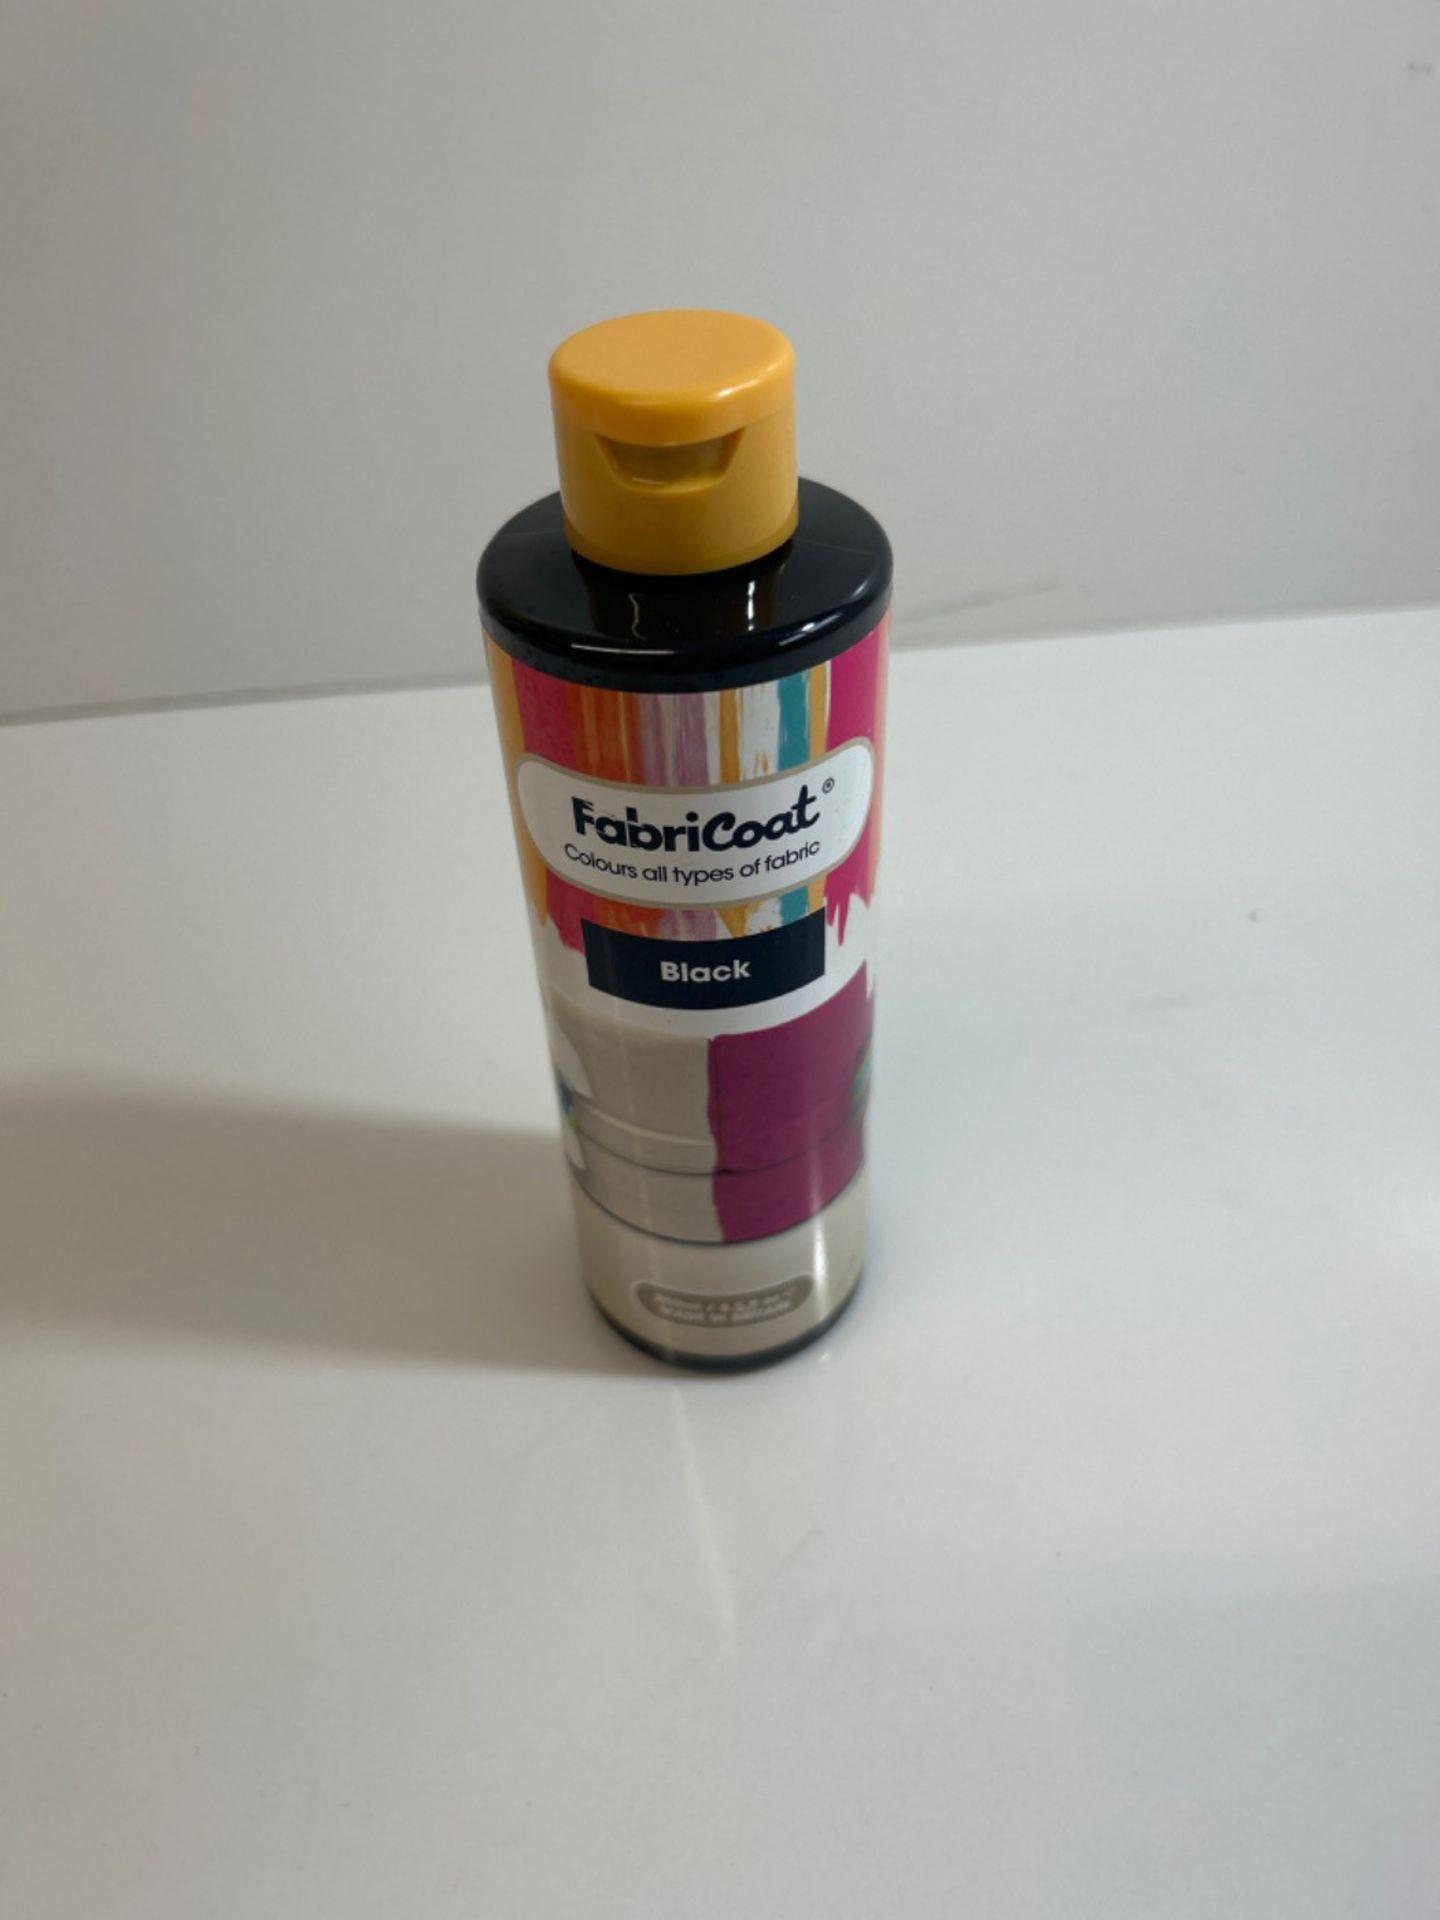 Furniture Clinic Fabricoat Fabric Paint â Restore or Change the Colour of Any Fabric - Paint Direc - Image 2 of 3